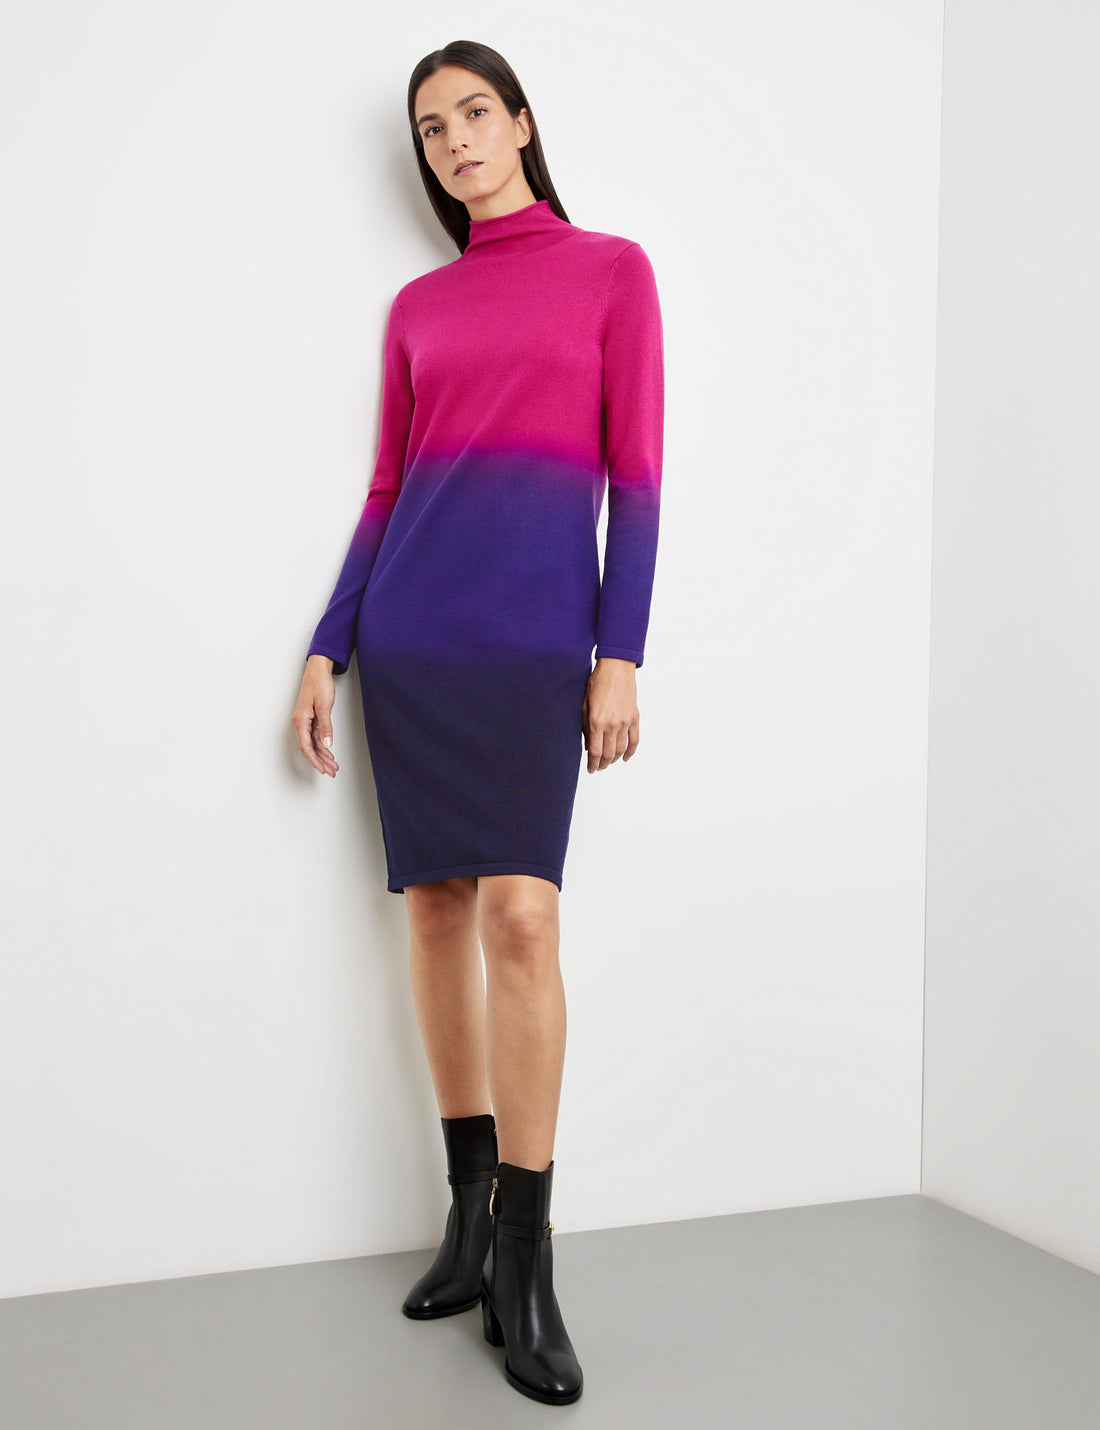 Knitted Dress With A Stand-Up Collar And Colour Graduation_280053-35708_3038_01